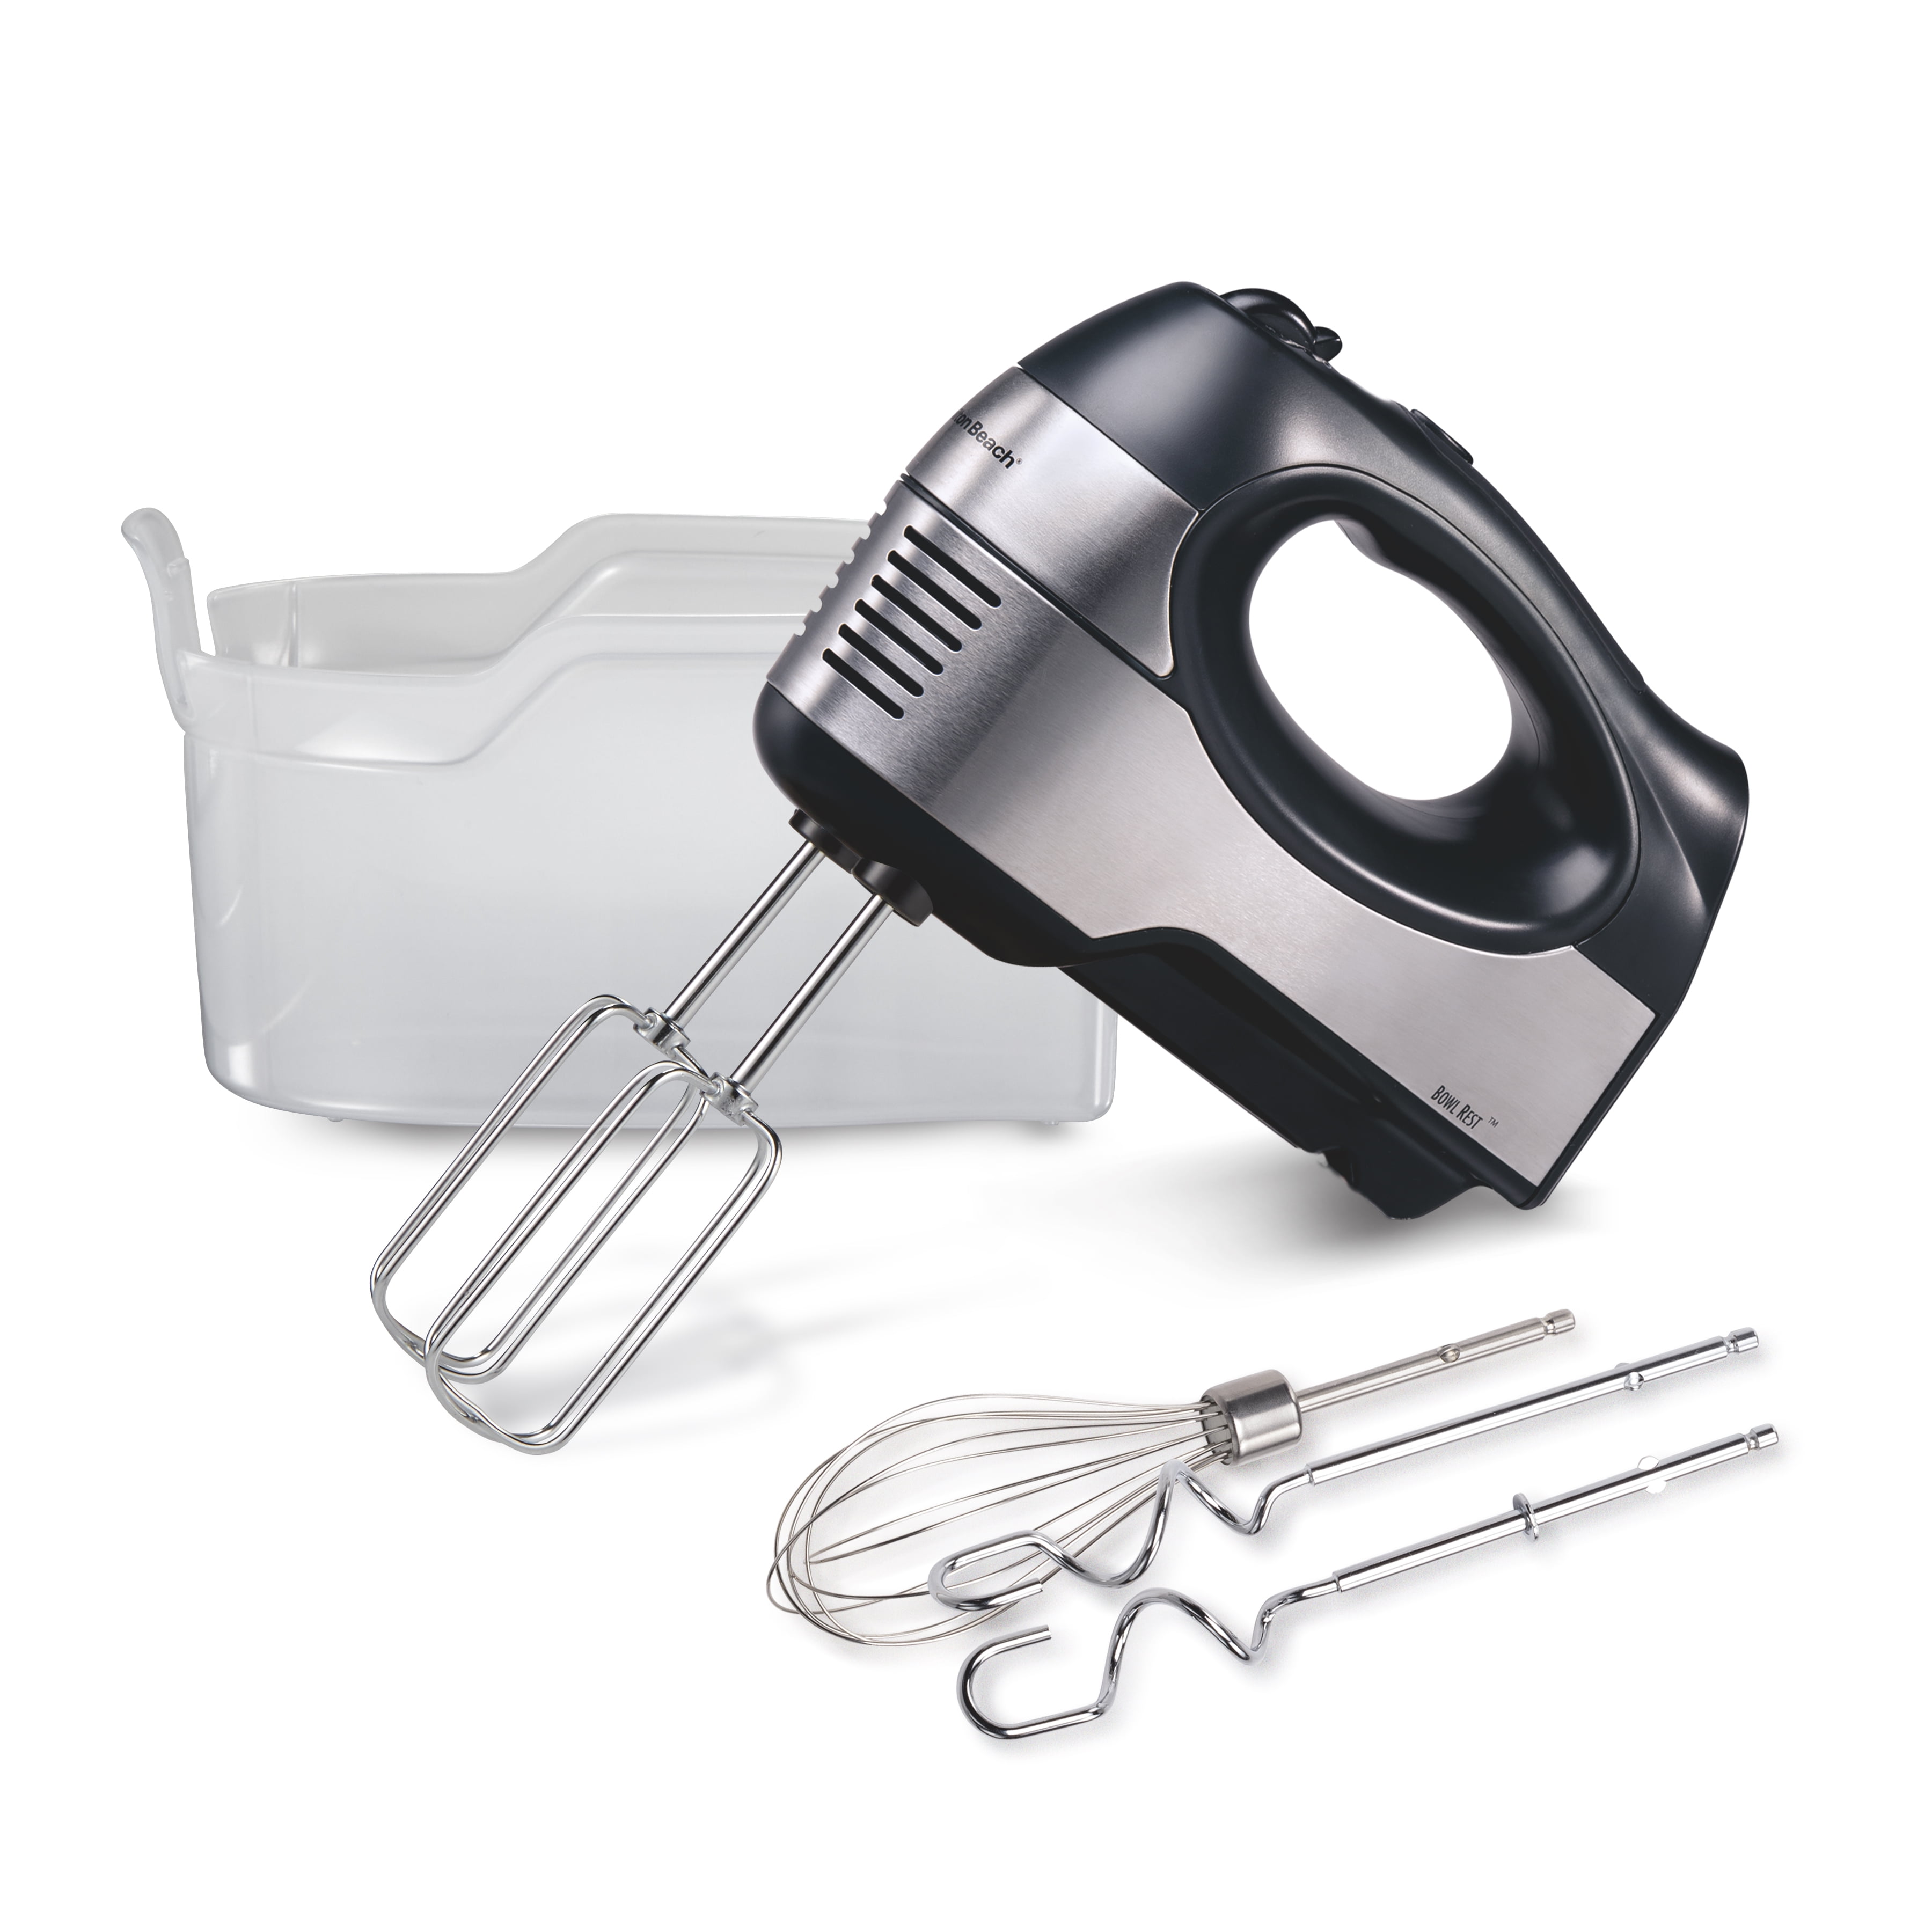 Black & Decker Handy Mixer 9210 Replacement Parts -Beater, Stir Paddle, or  Whisk